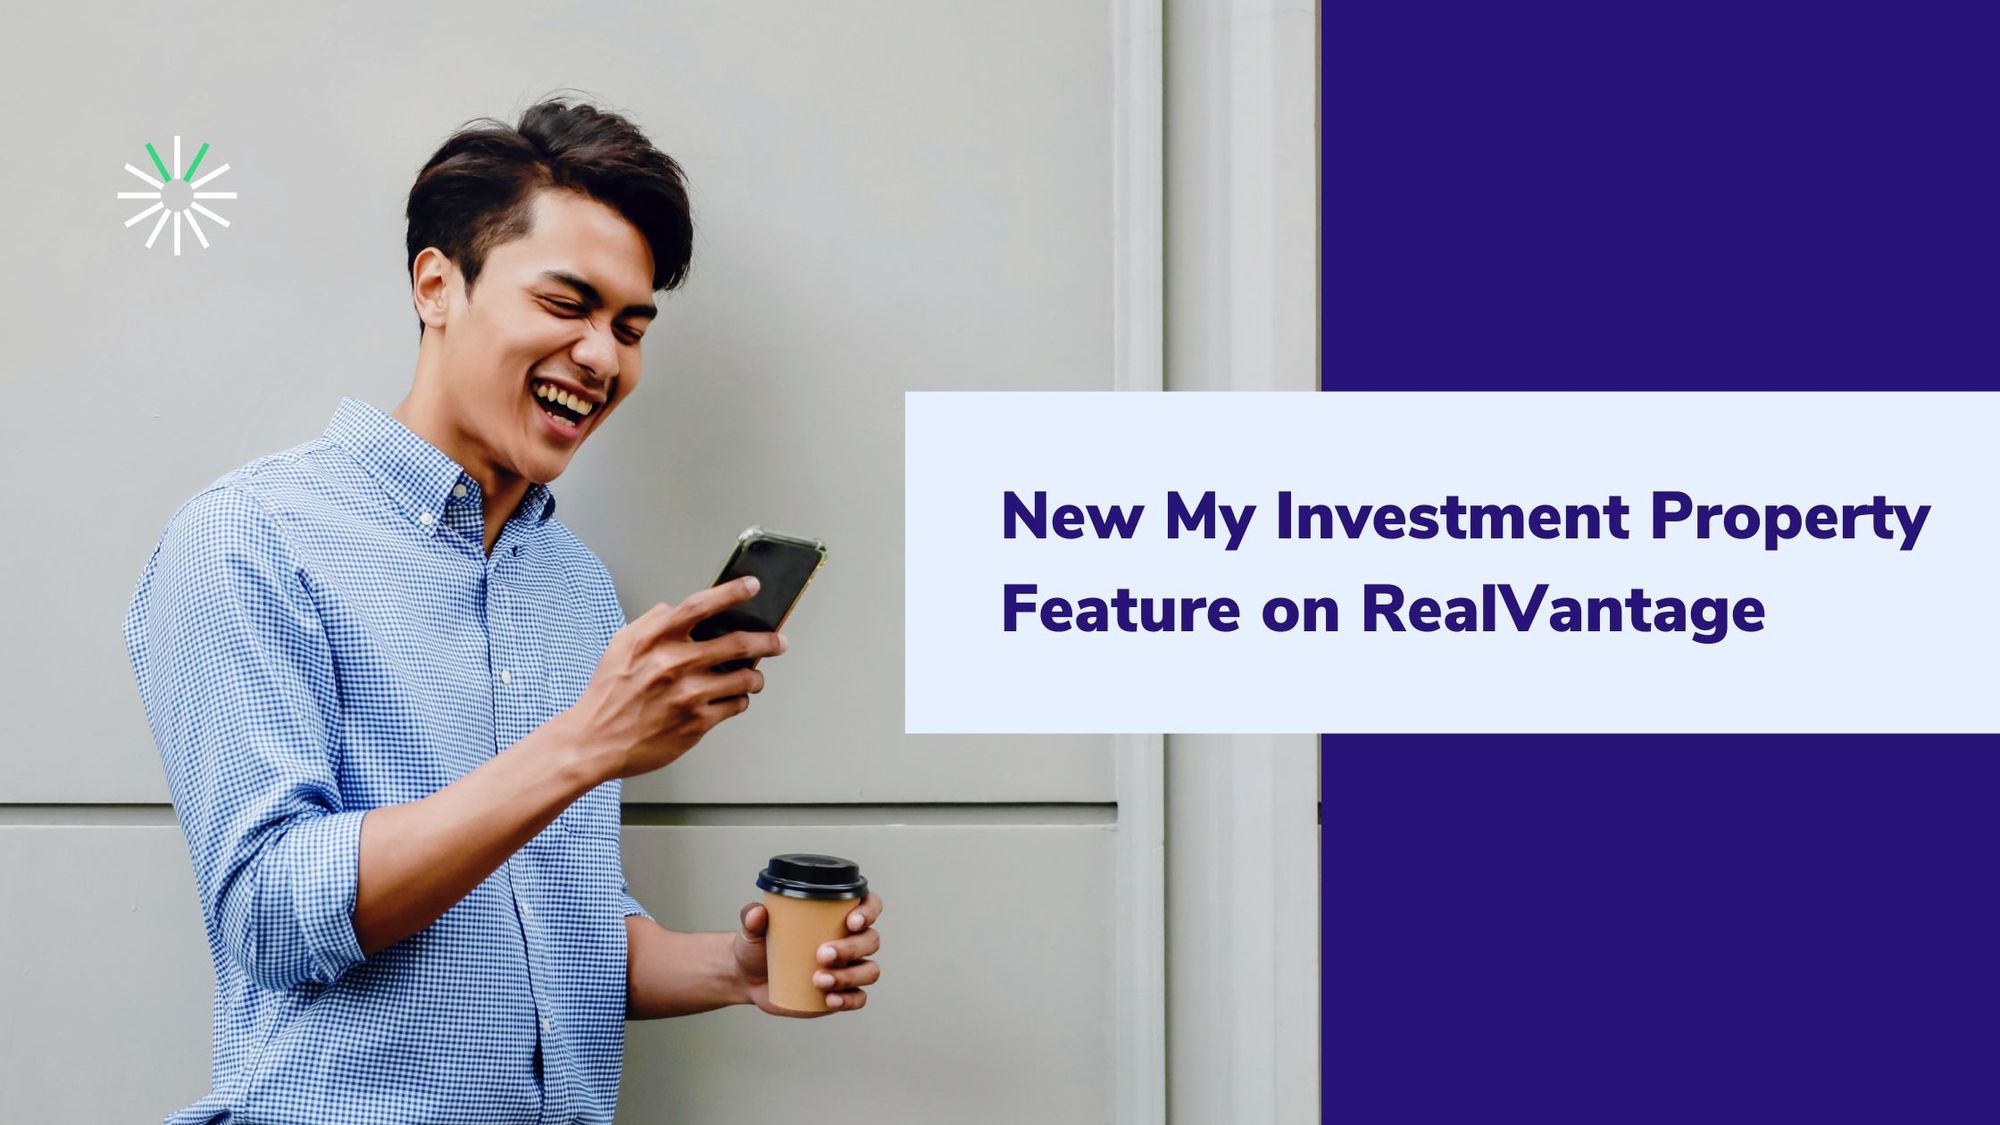 New My Investment Property Feature on RealVantage